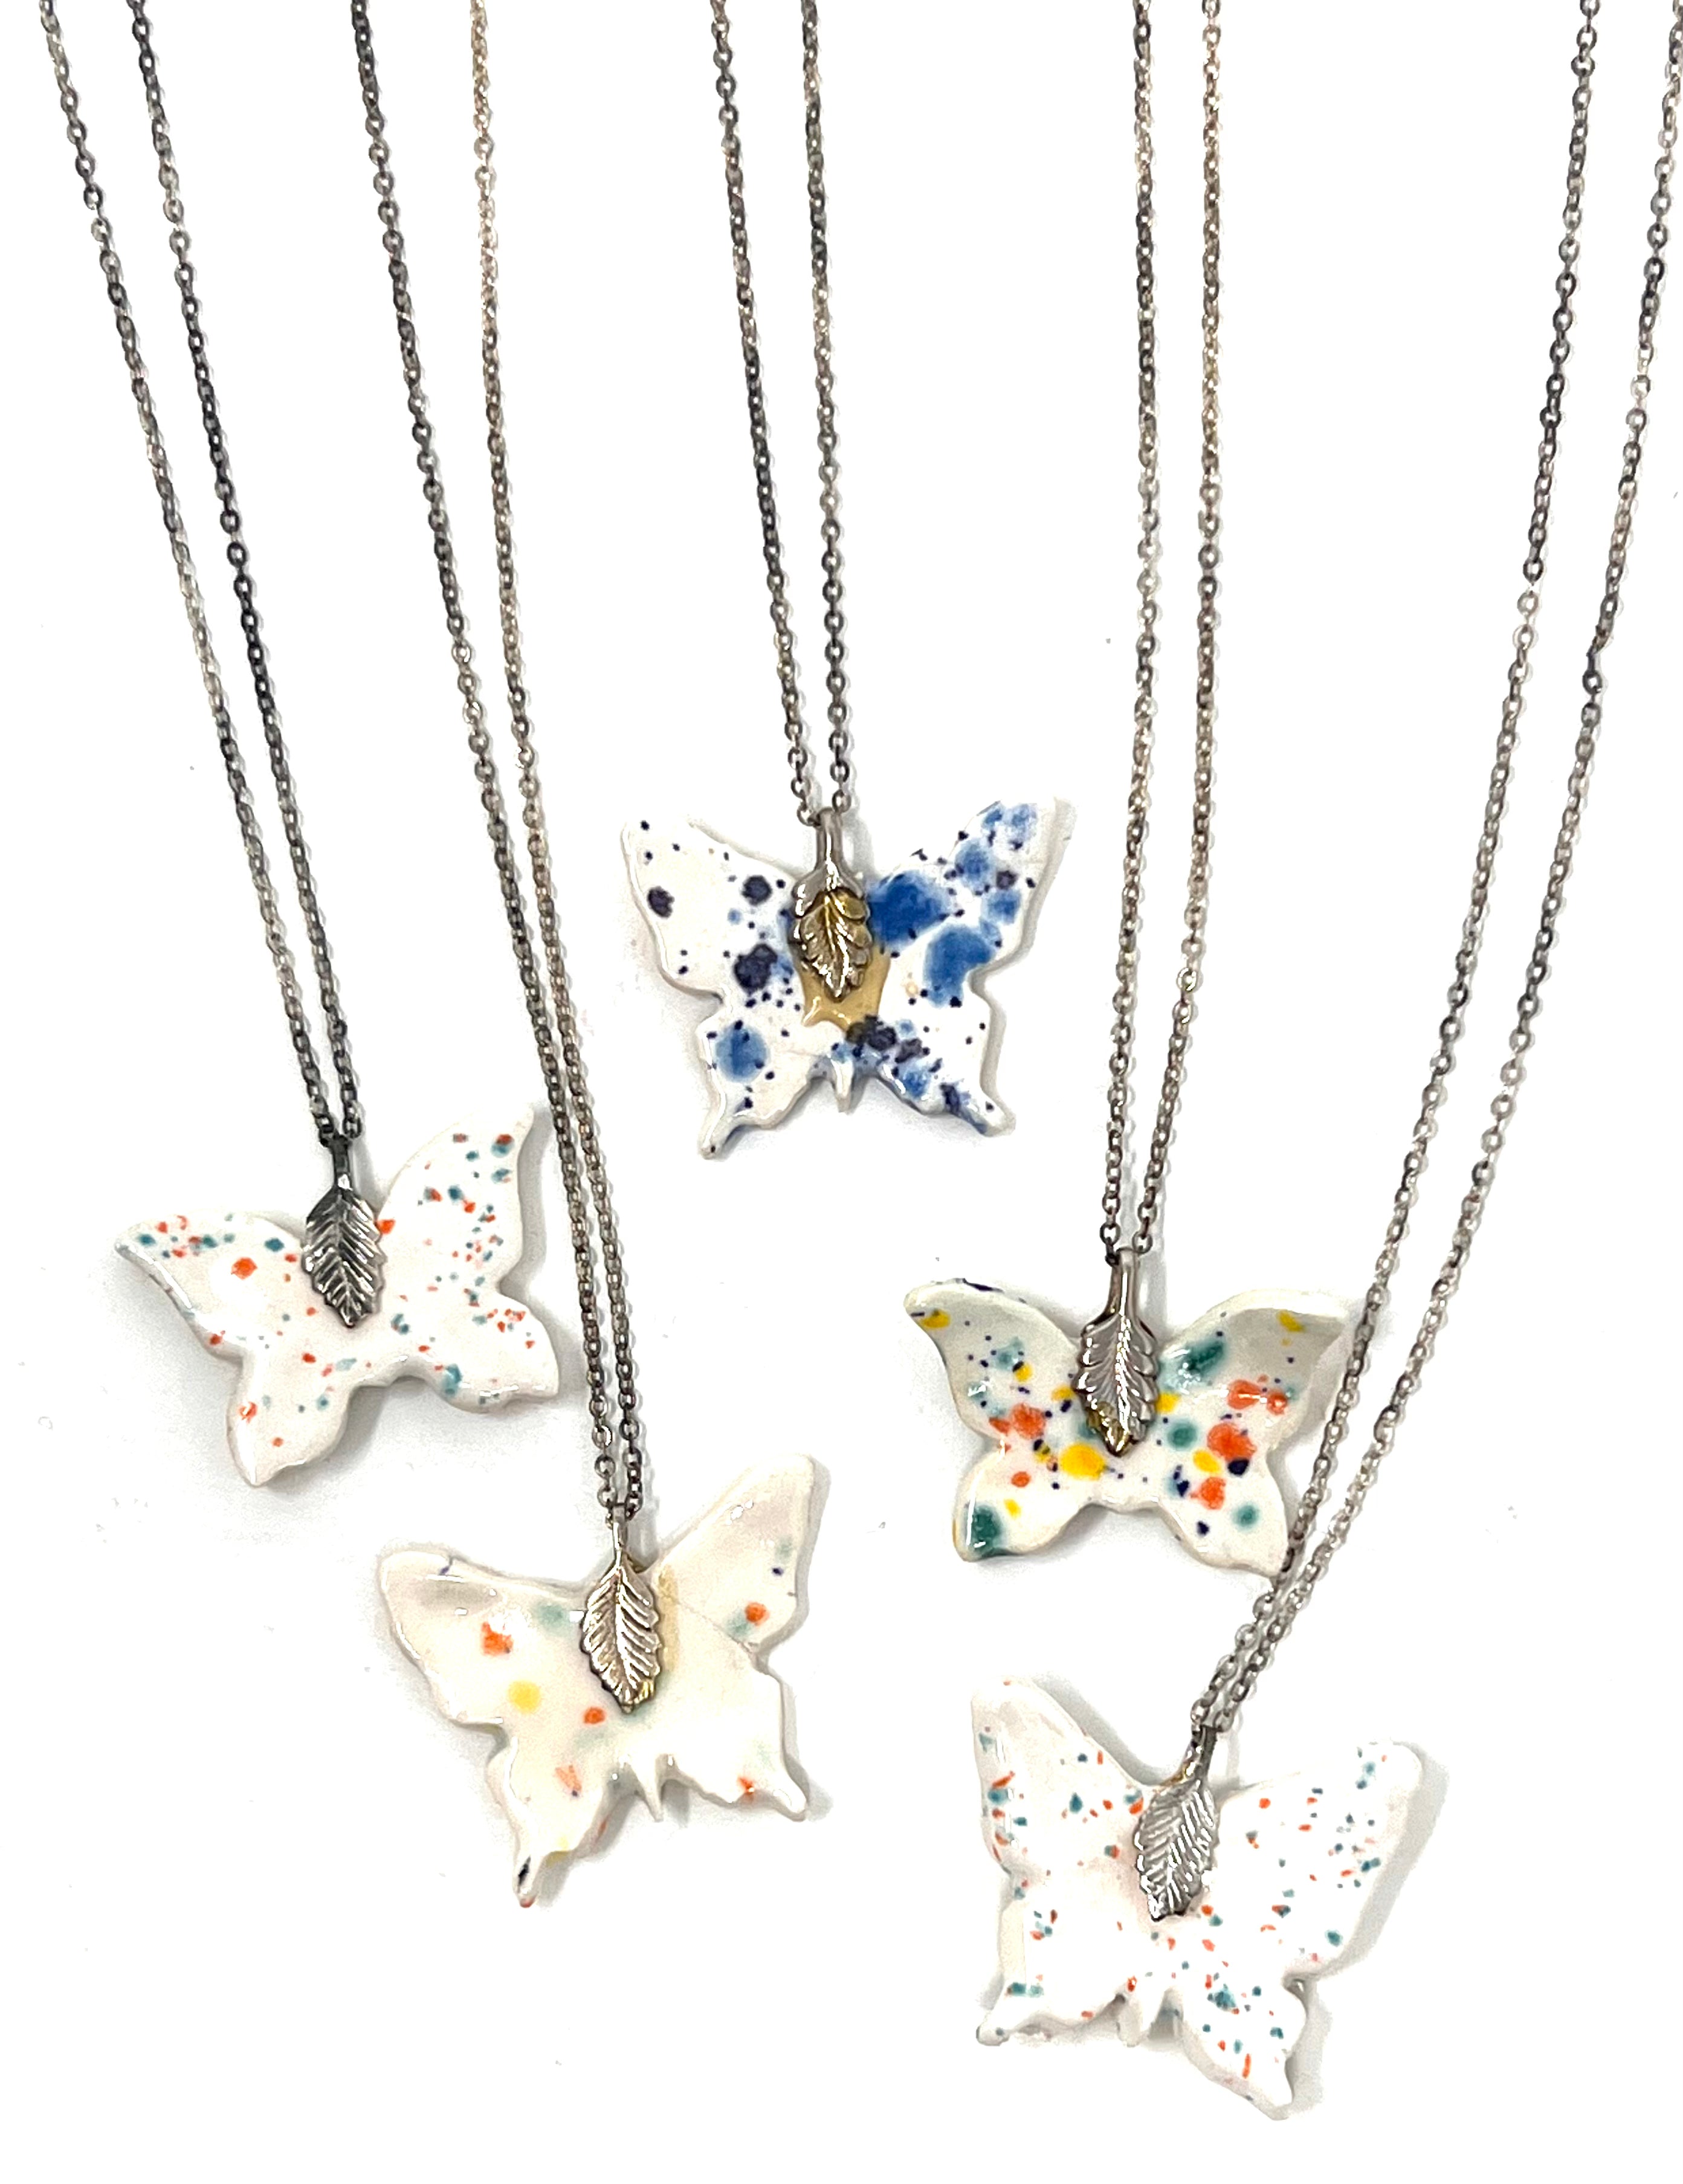 Handmade ceramic butterfly Necklace